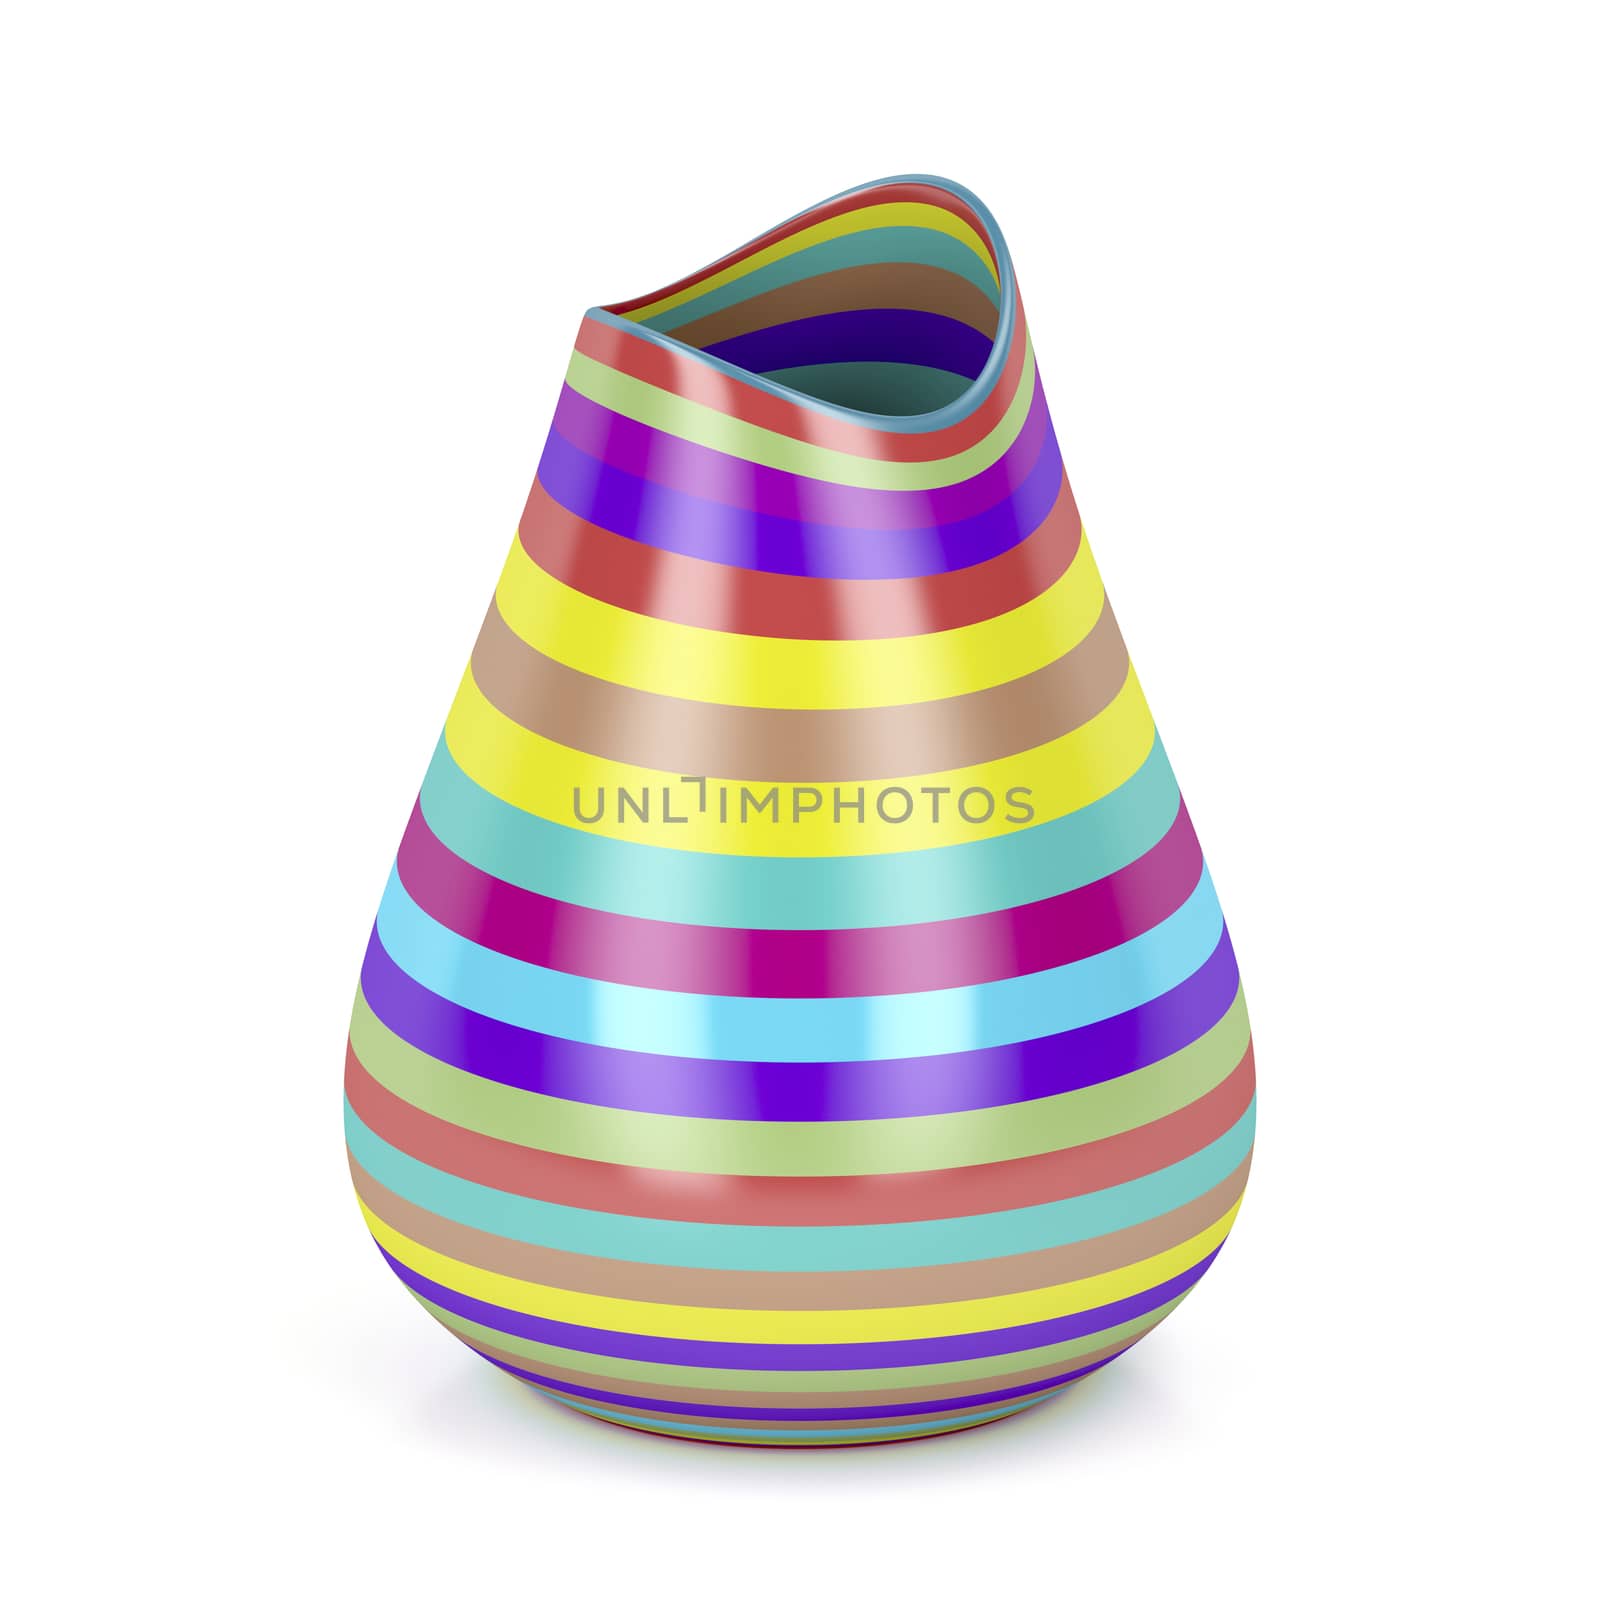 Striped vase by magraphics